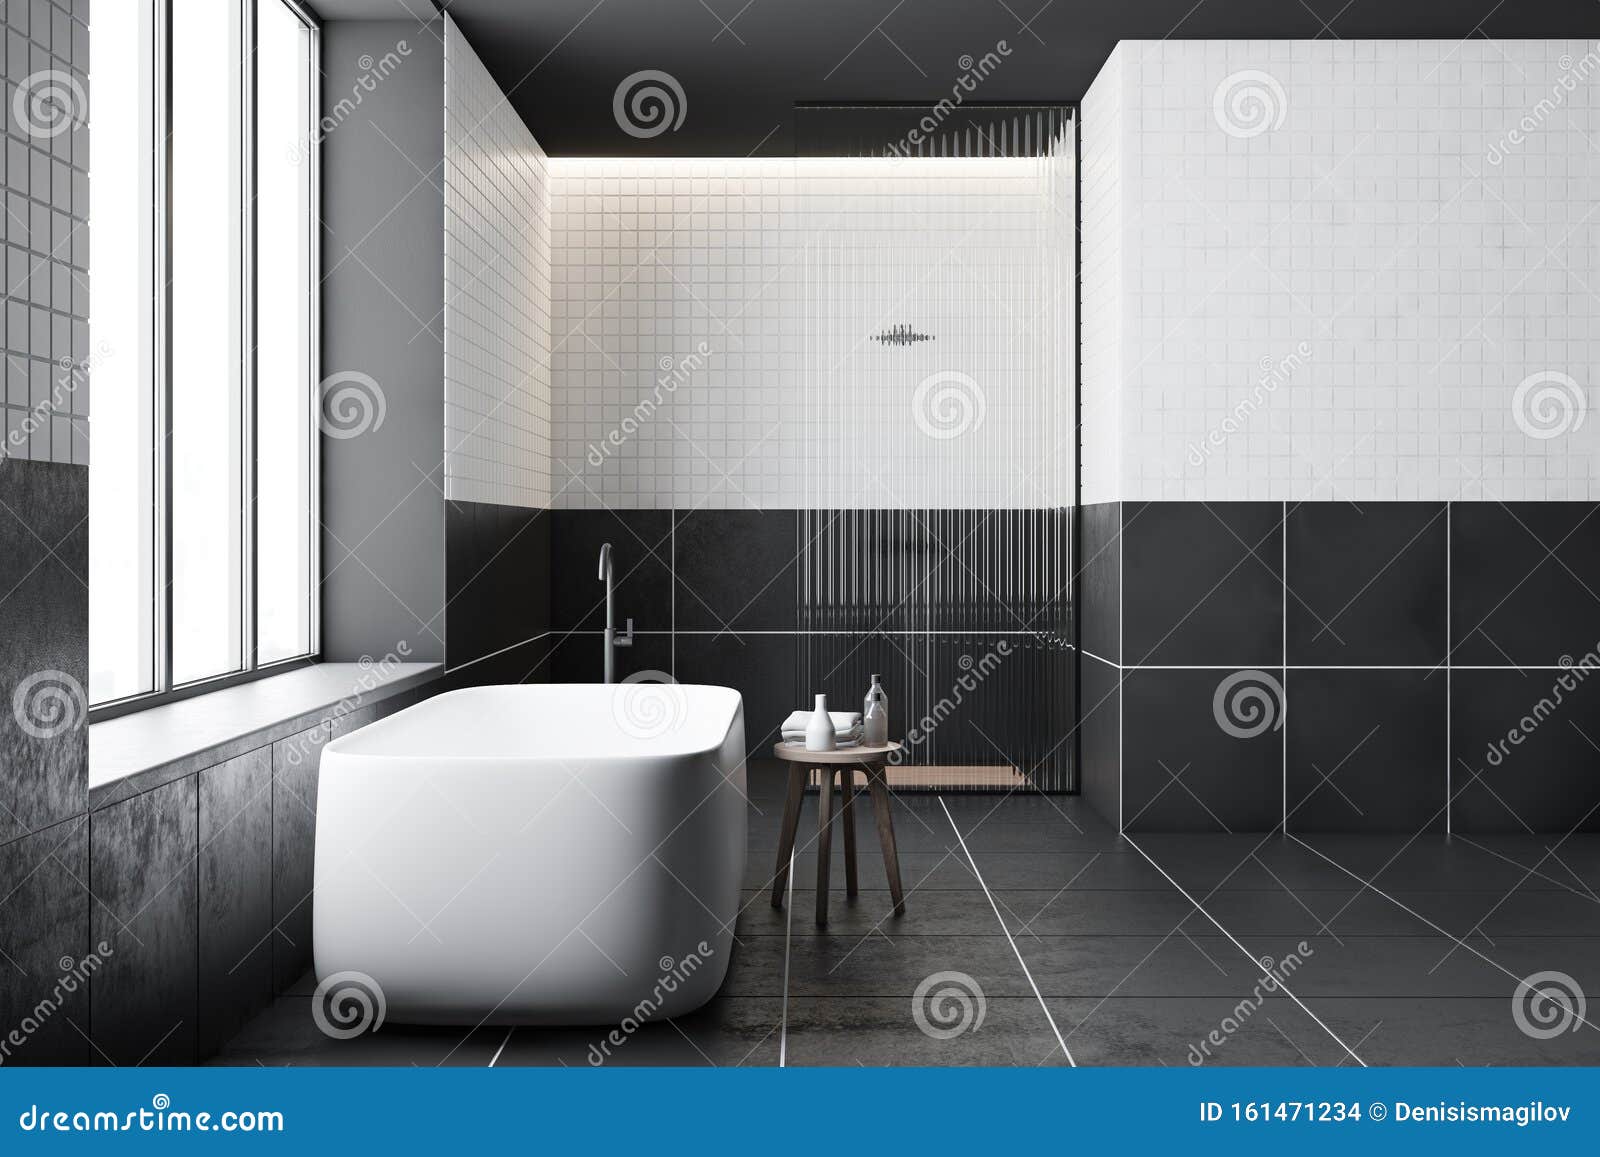 Side View Of Tiled Bathroom Tub And Shower Stock Illustration Illustration Of Inside Beautiful 161471234